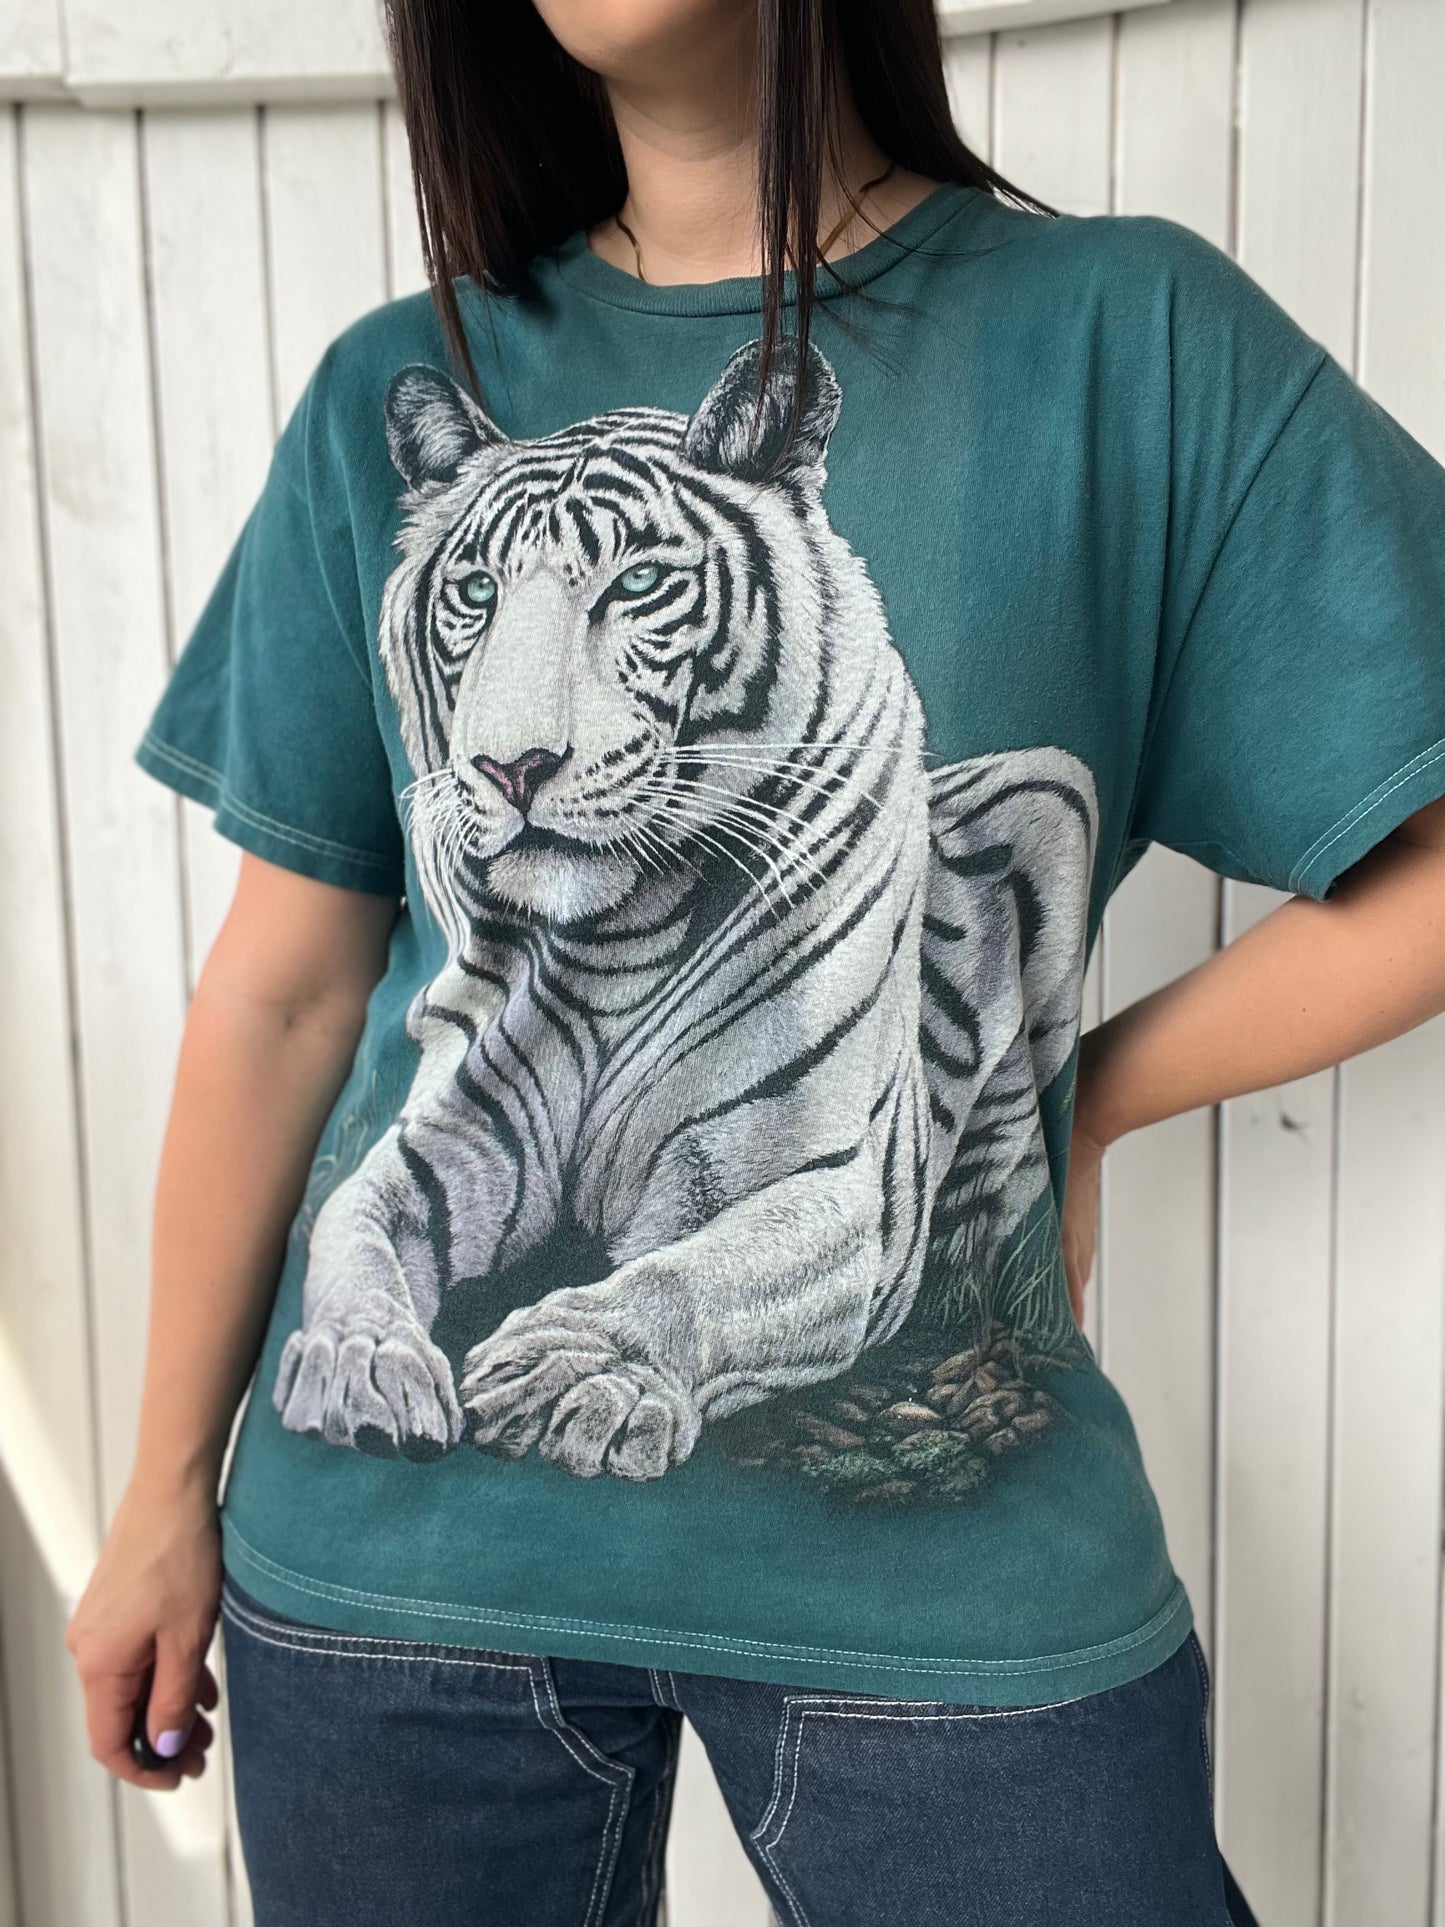 Turquoise White Tiger Tee - Size L